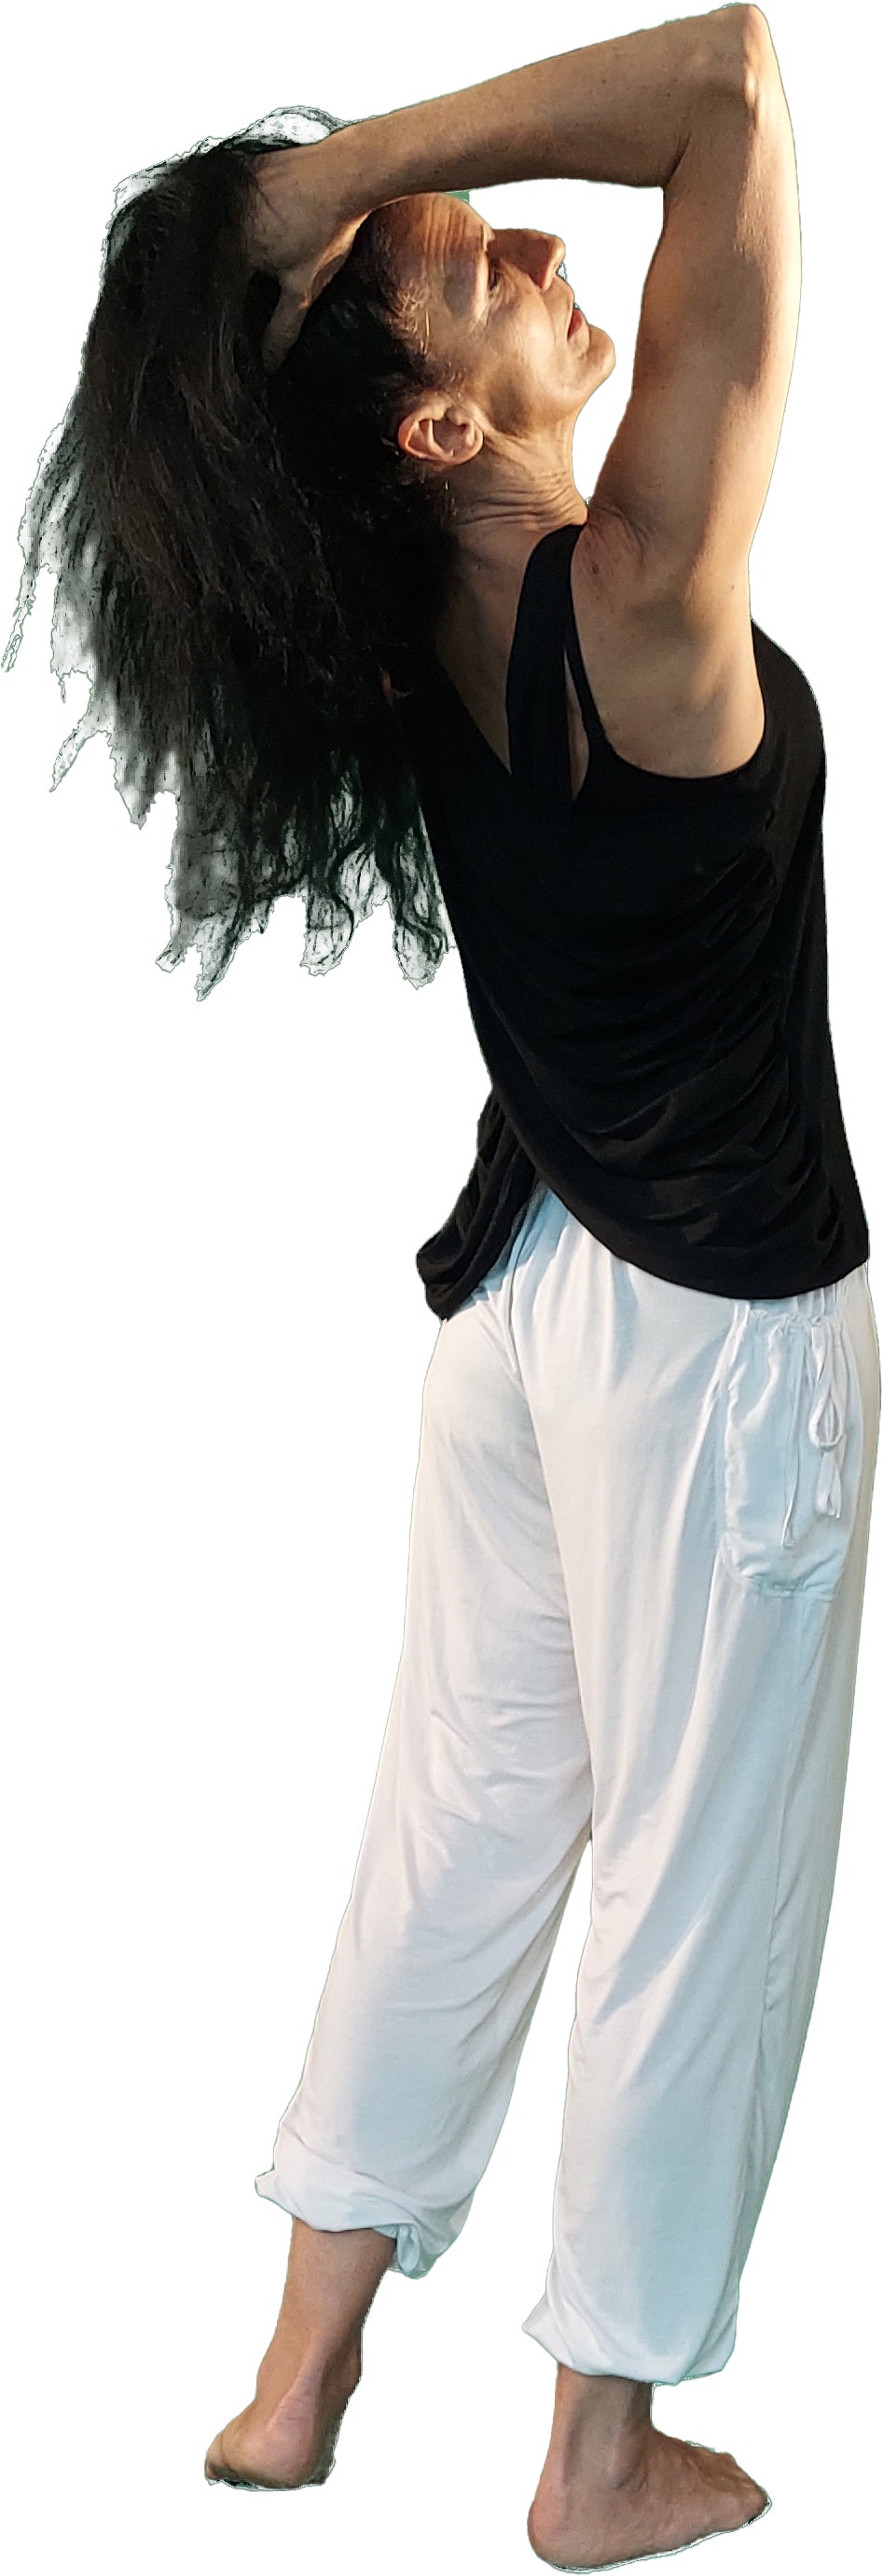 YOGAZ White Eco-Friendly Bamboo YOGAZ Pants with our Signature Pocket in Pocket Design